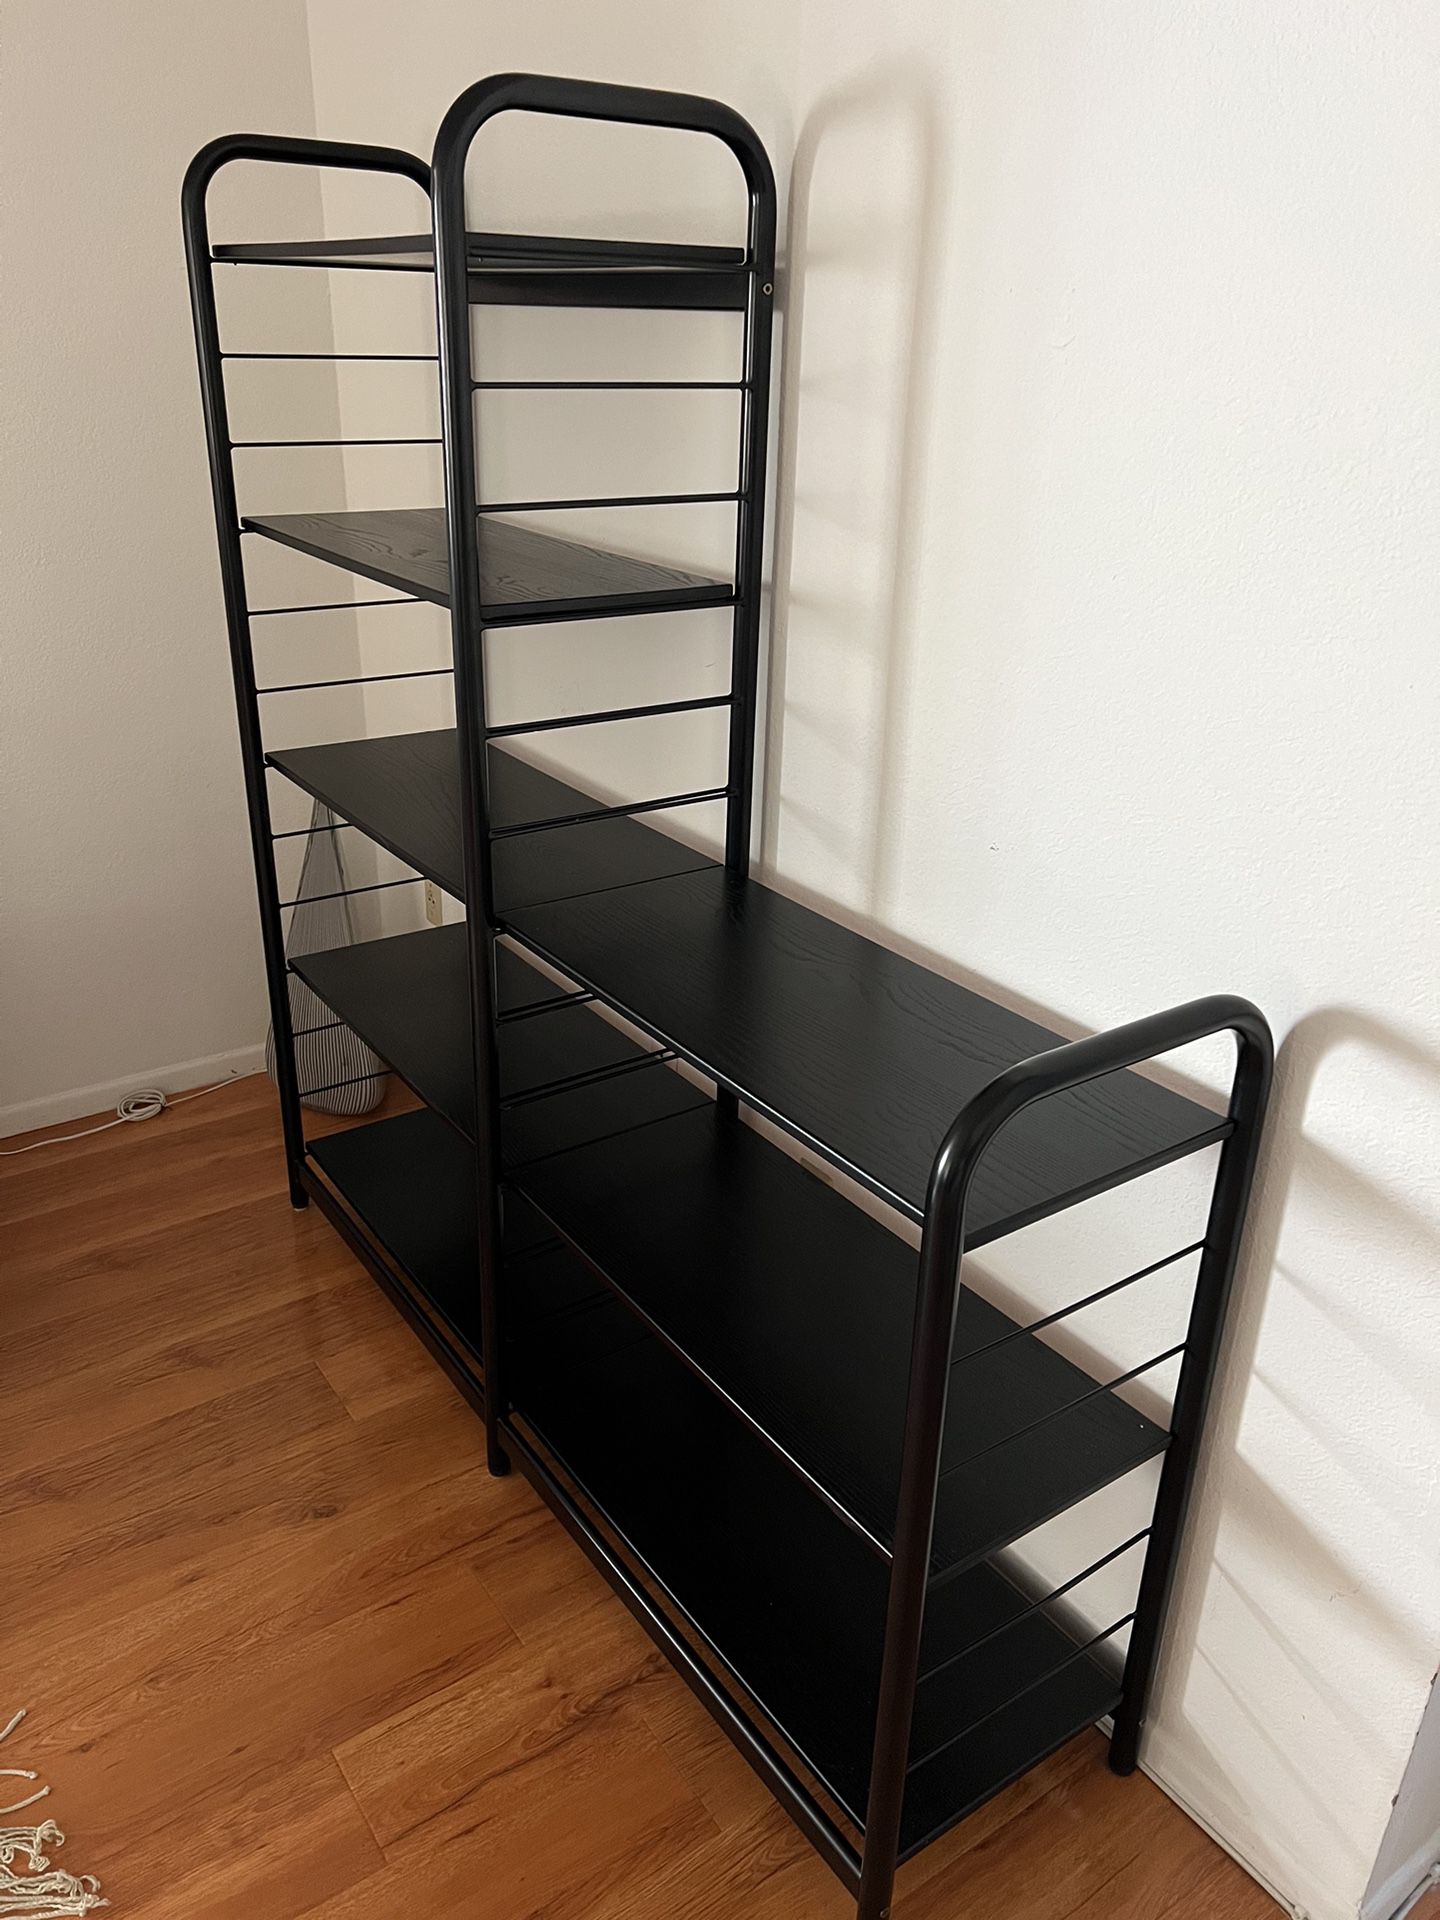 Book Case With Wood Shelves And Metal Stands